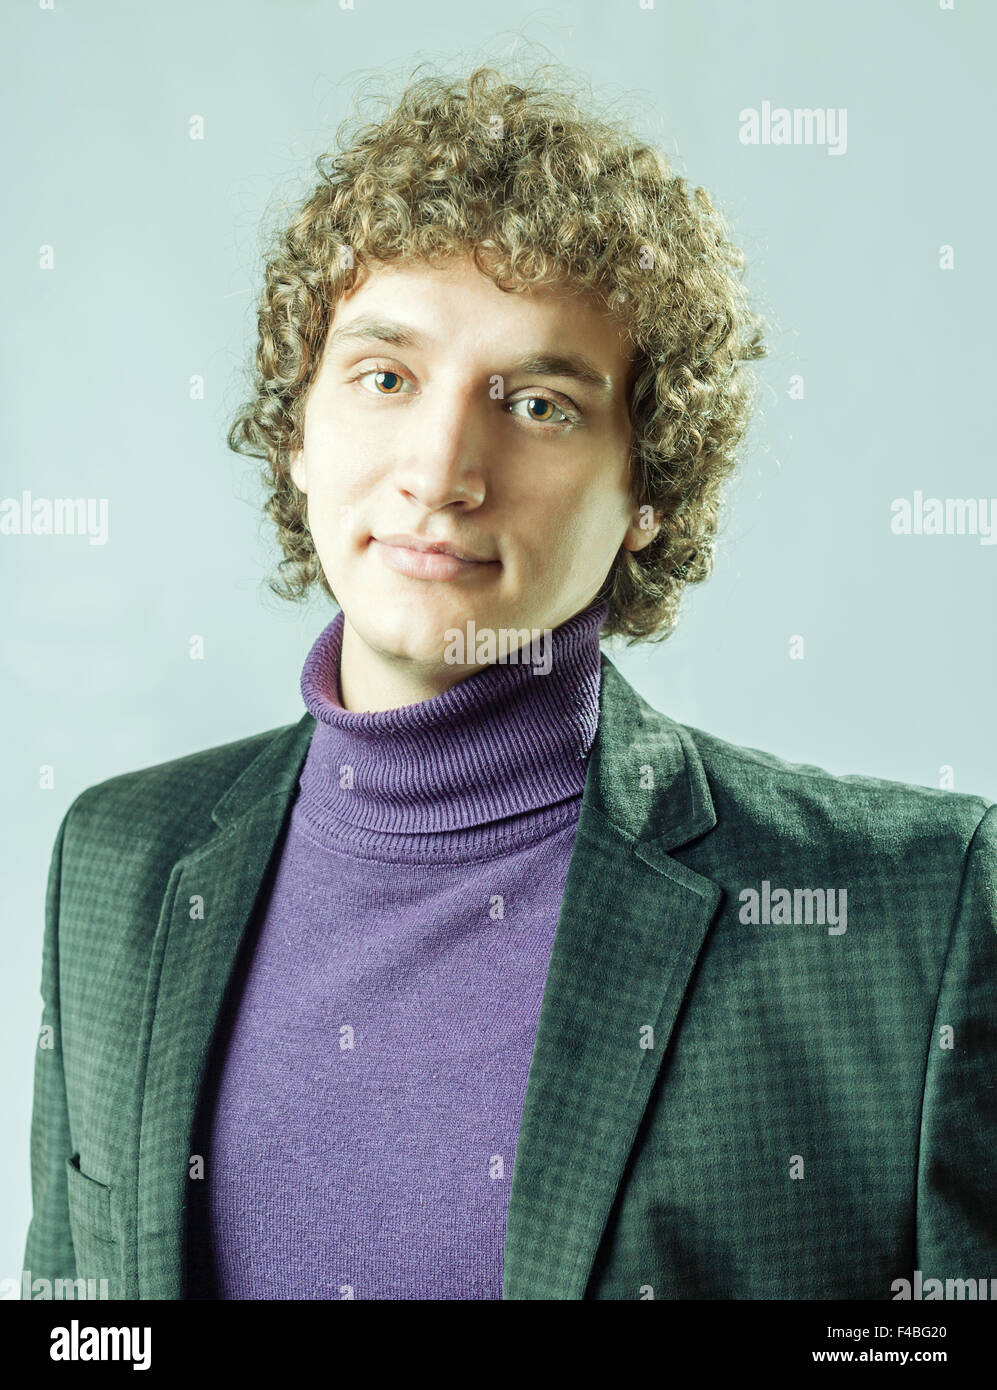 portrait of a young guy with curly hair Stock Photo - Alamy